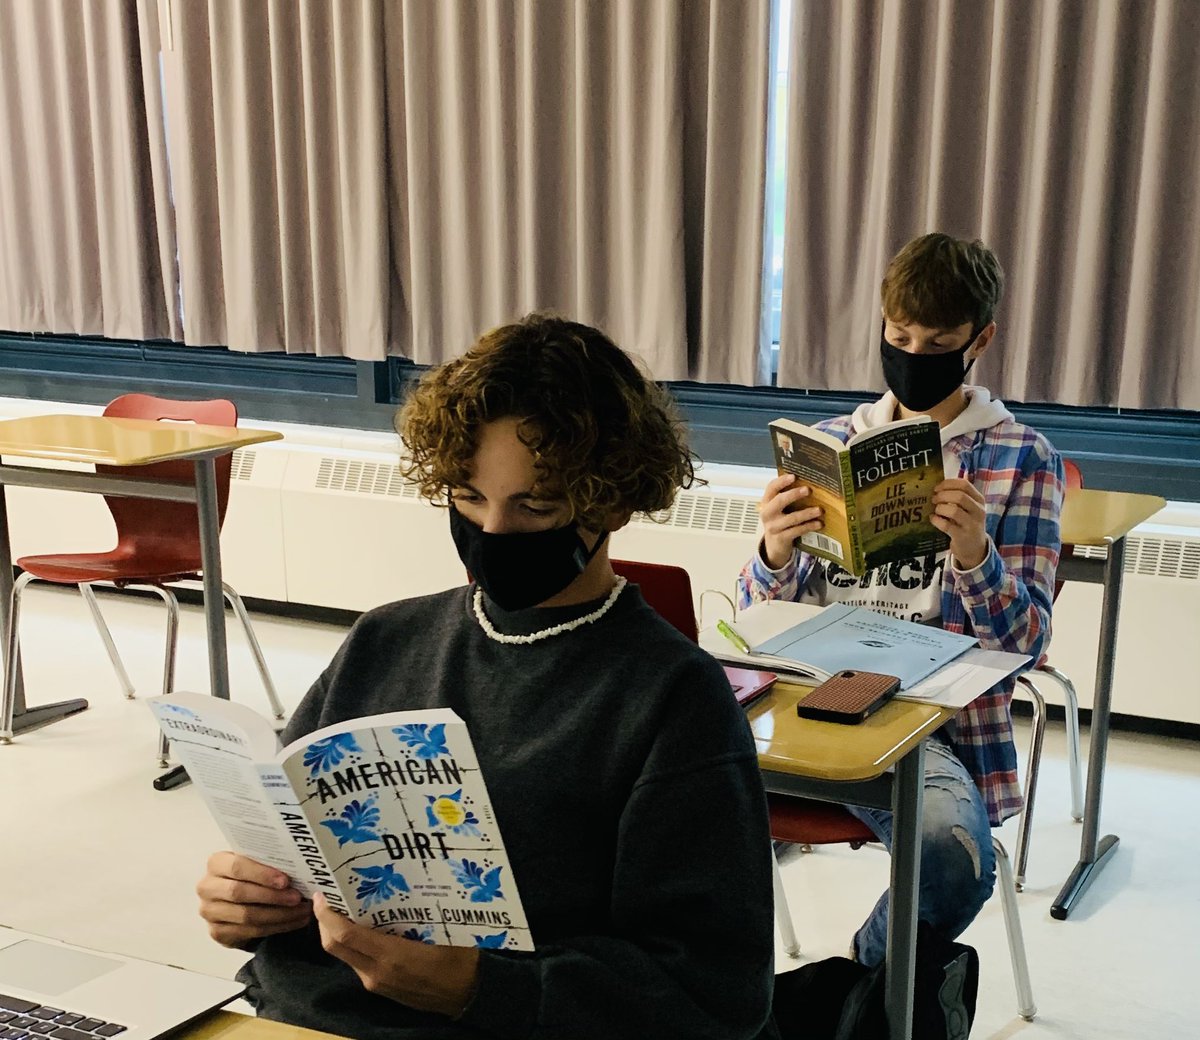 A whole lot of book love @GreaterFortErie today as grade 11 & 12s pick self-selected texts. #booklove #2020reads #AmericanDirt #AlltheWay #LieDownwithLions #gfessenglish #gfessbooklove #dsbnbooklove #NBE3U (contemporary indigenous voices) #ENG3U #ENG4U